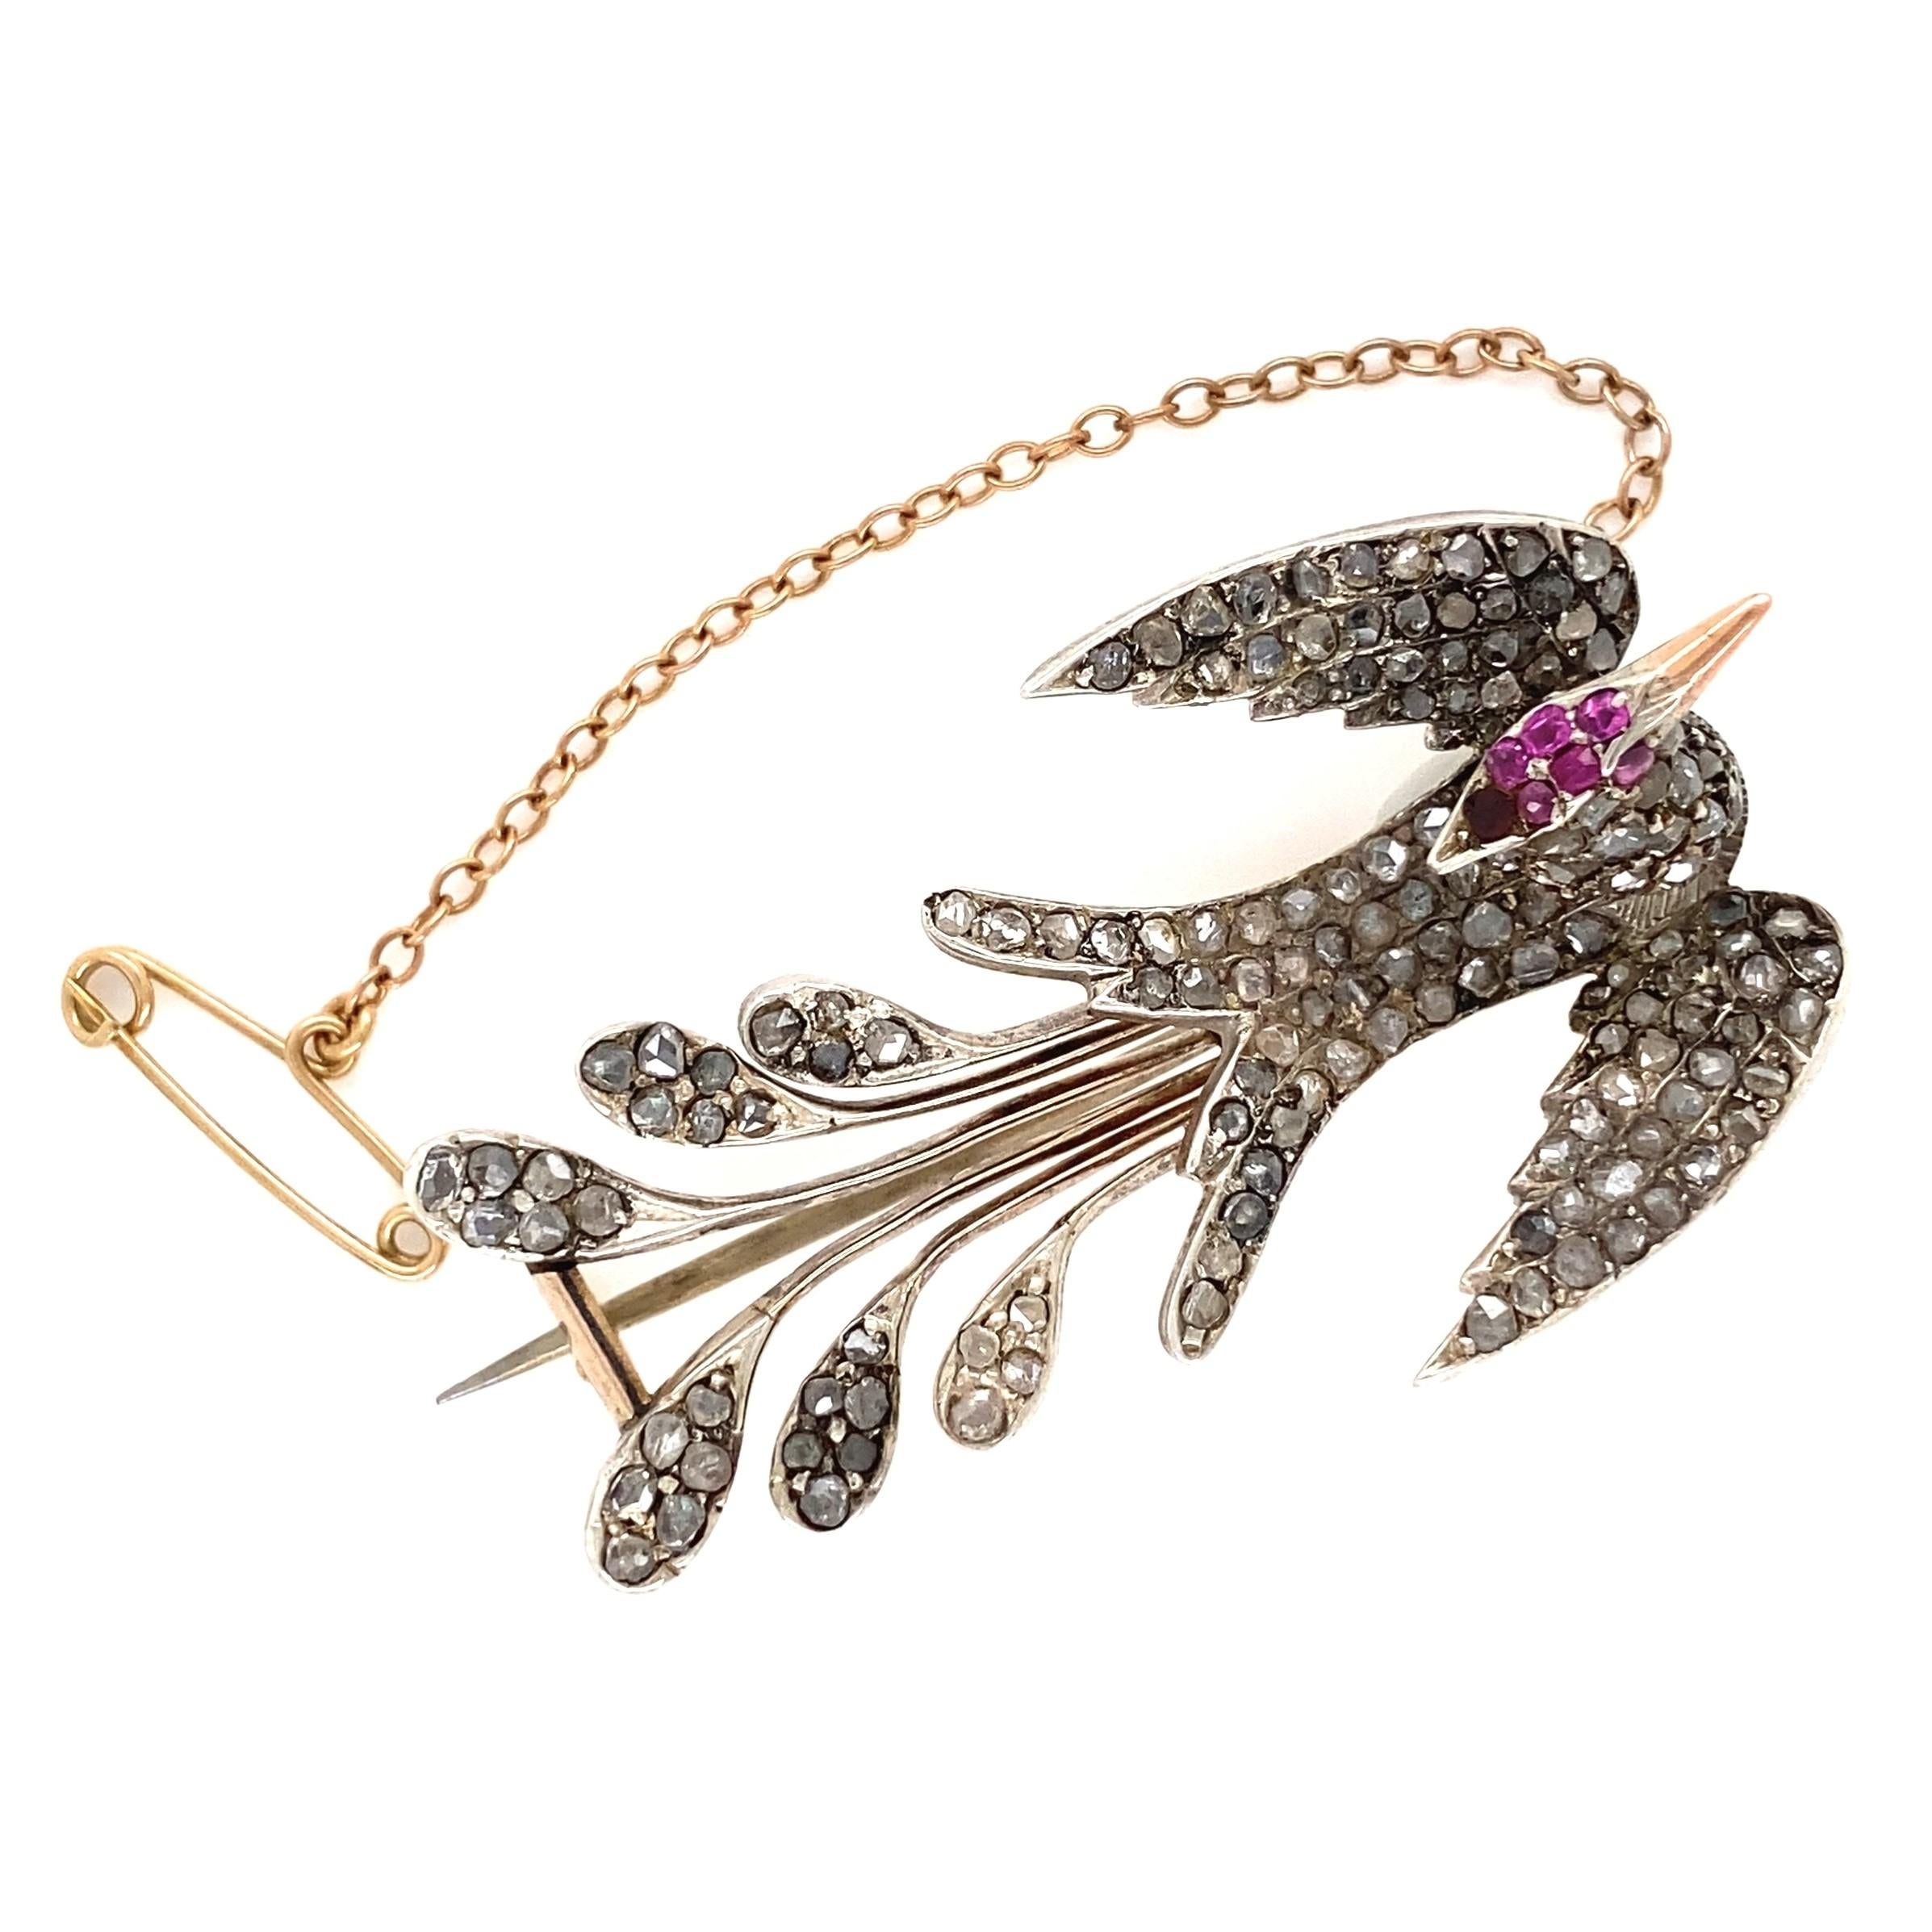 Fabulous Victorian Antique Diamond and Ruby Bird Brooch Pin. Hand set with 175 Rose Cut Diamonds approx. 1.40tcw and 7 Natural Rubies approx. 0.10tcw. Hand crafted 18K Yellow Gold mounting. Bird measures approx. 1.82